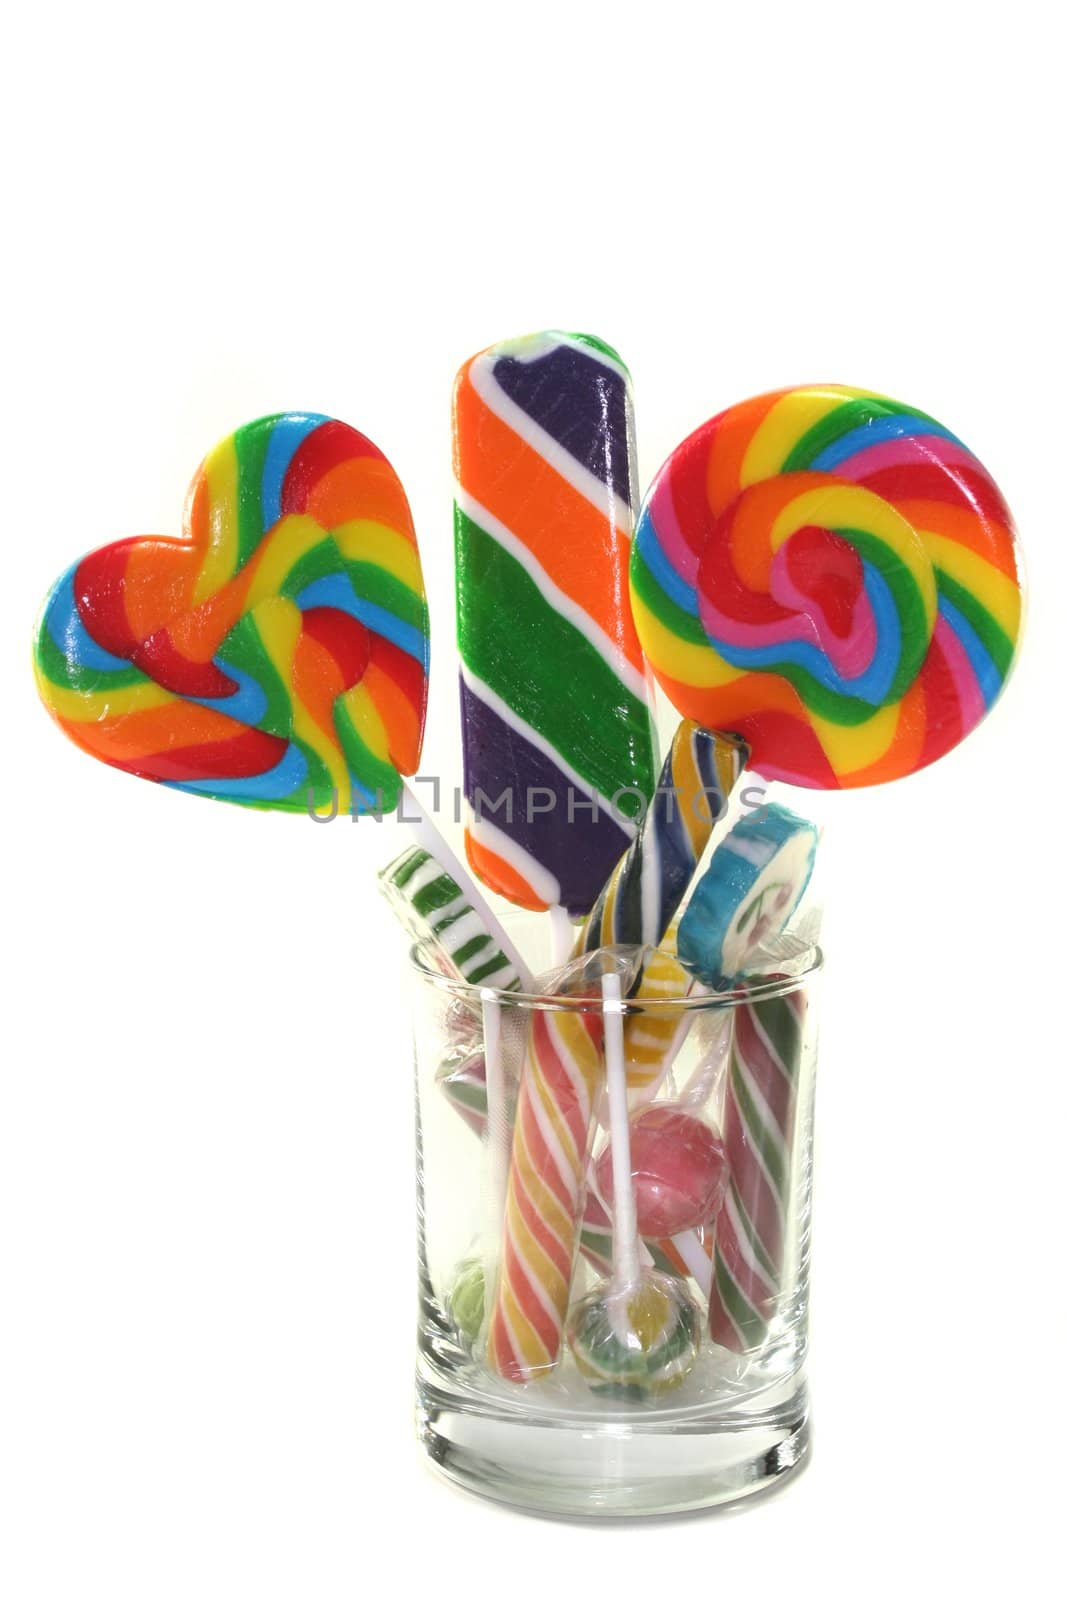 many colorful lollipops in a jar